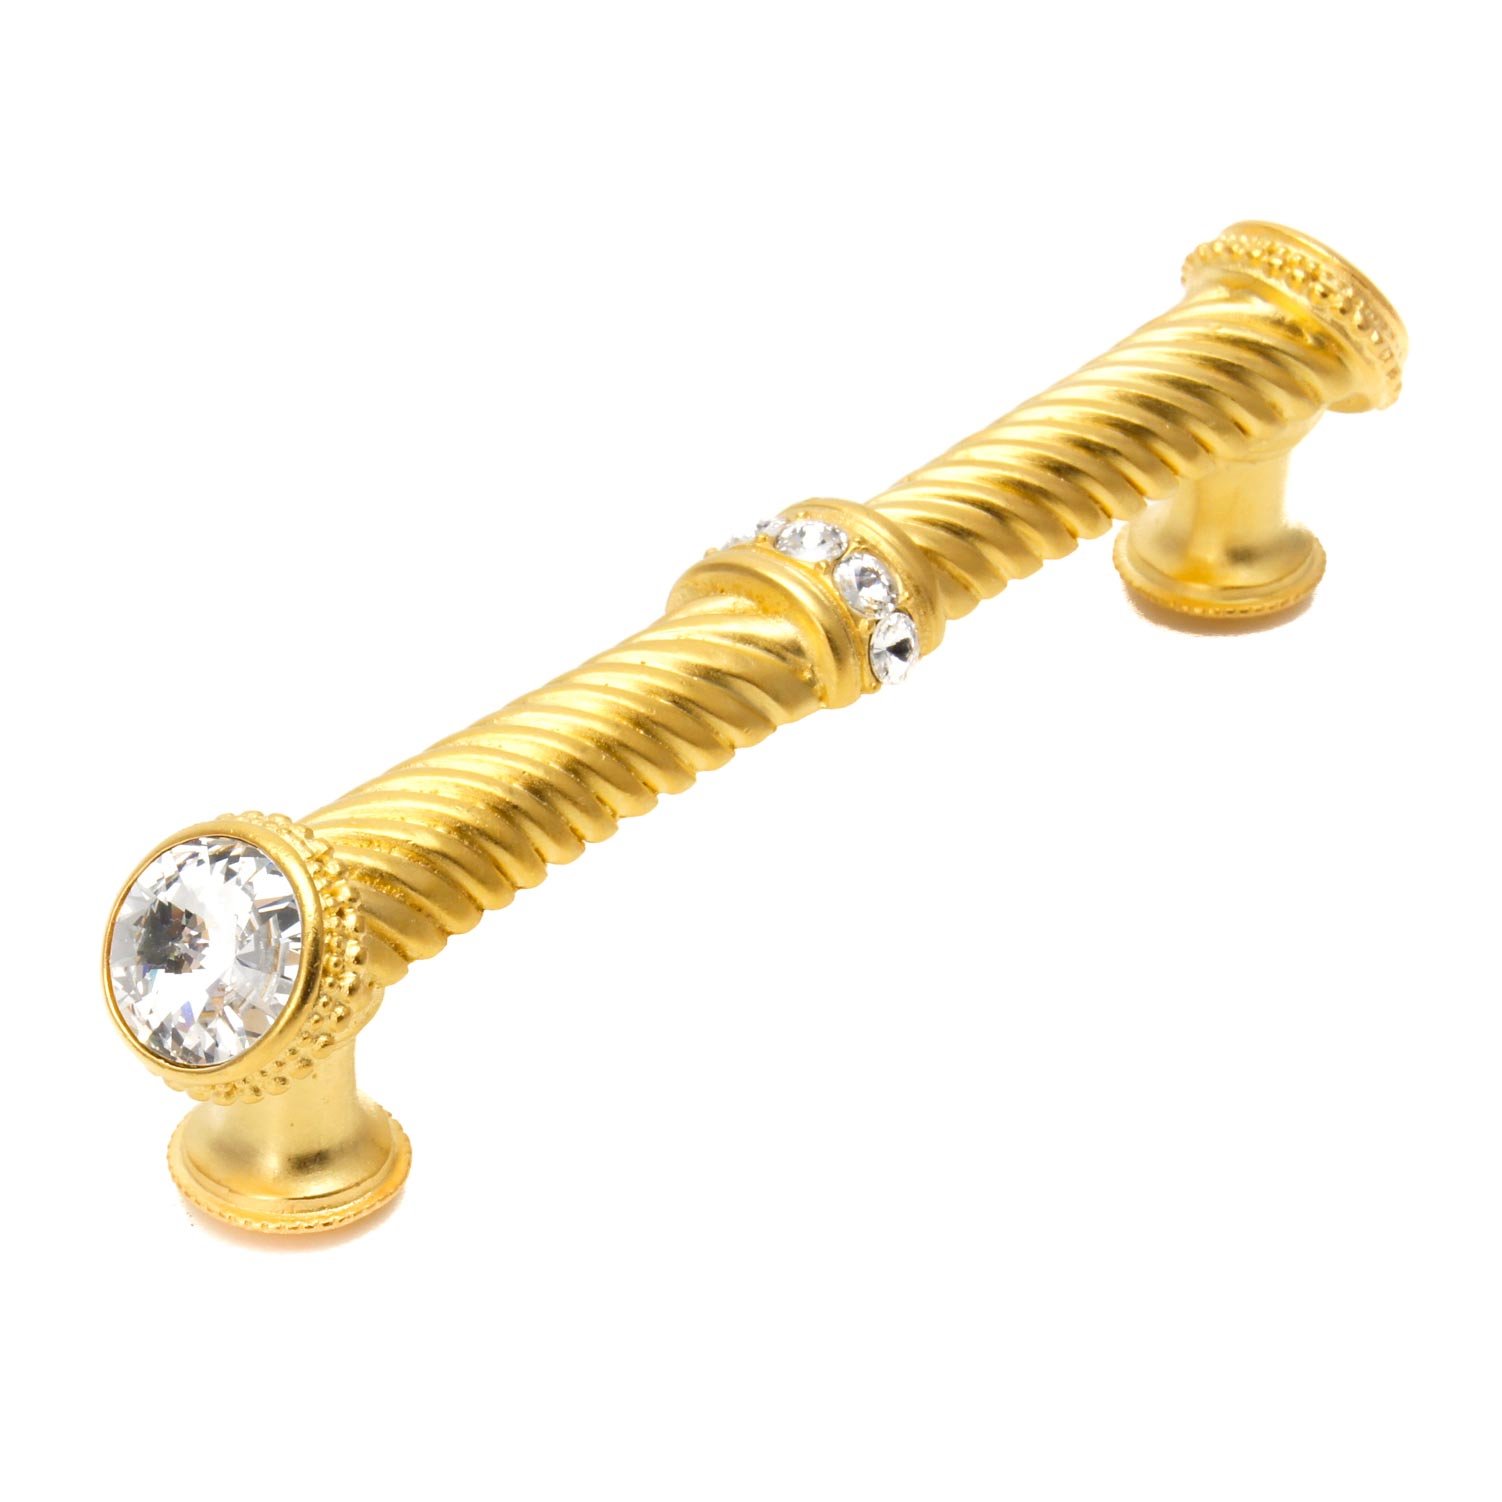 Caché 5" Centers Large Pull With End & Center Swarovski Crystals in Satin Gold with Vitrail Light